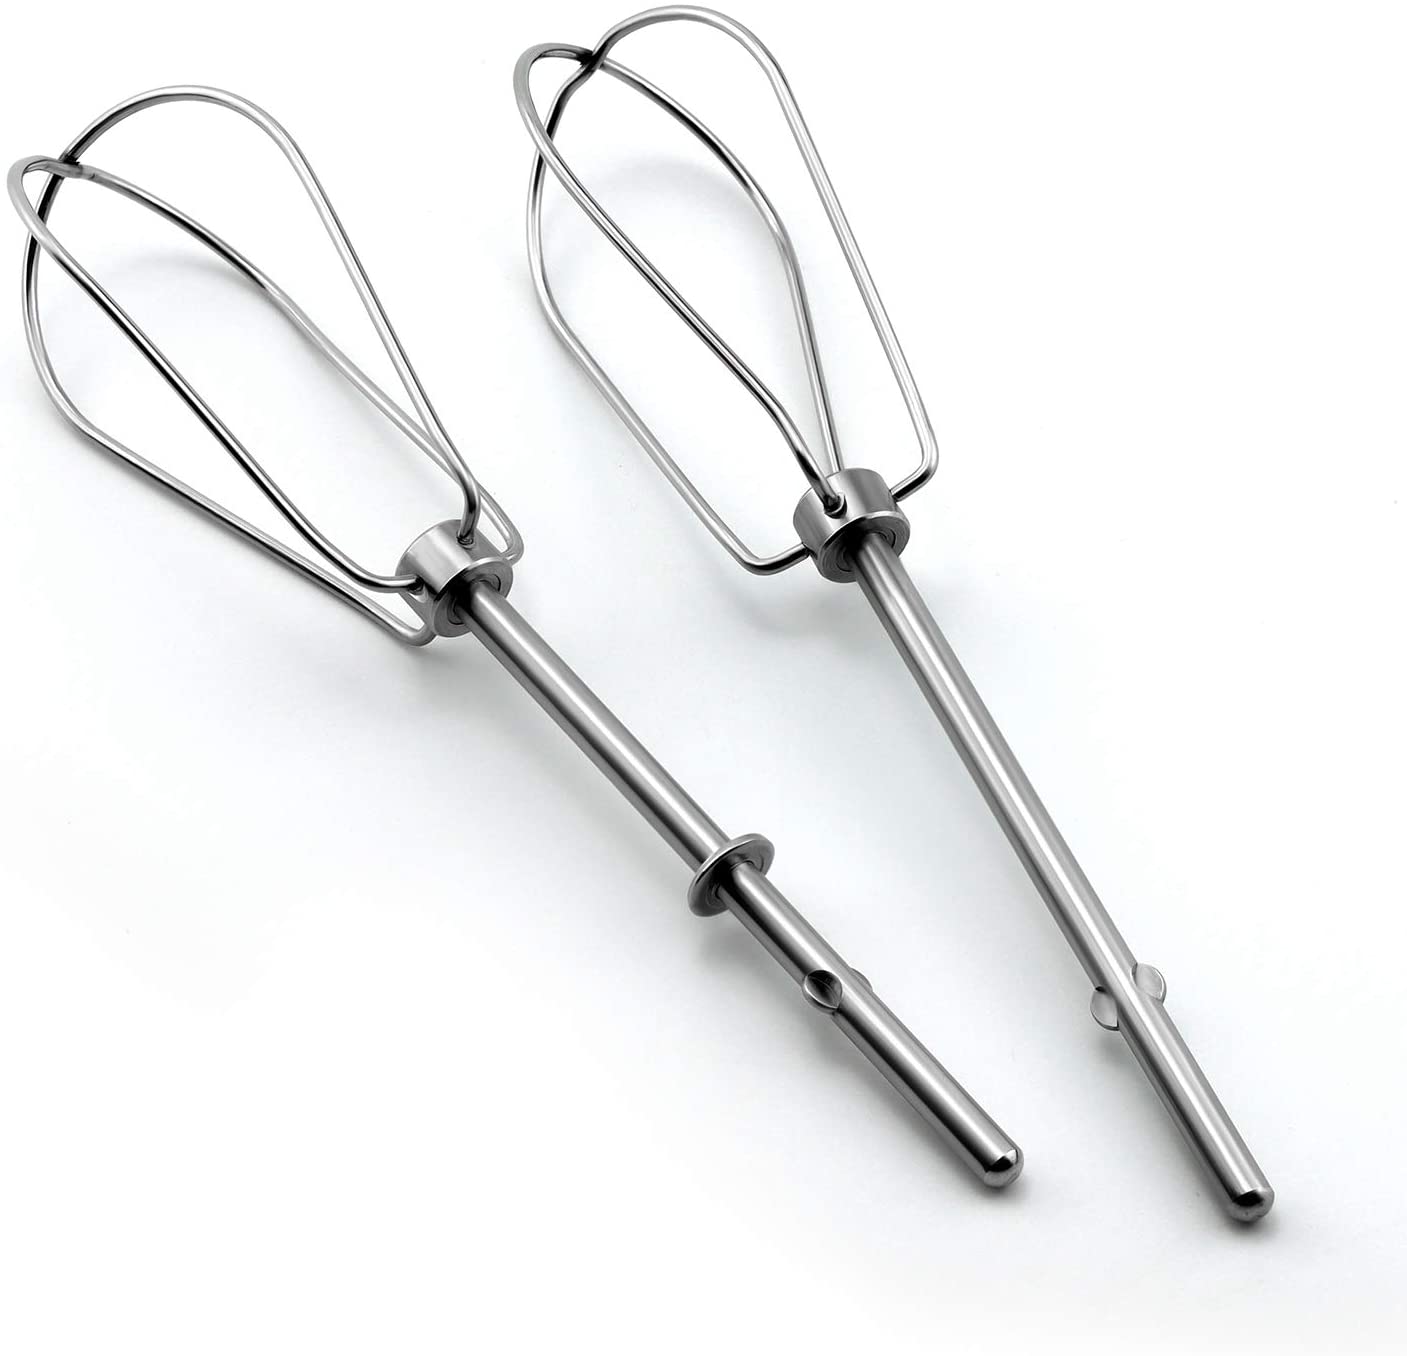 AMI PARTS Stainless Steel Hand Mixer Replacement Beaters, 2-Count